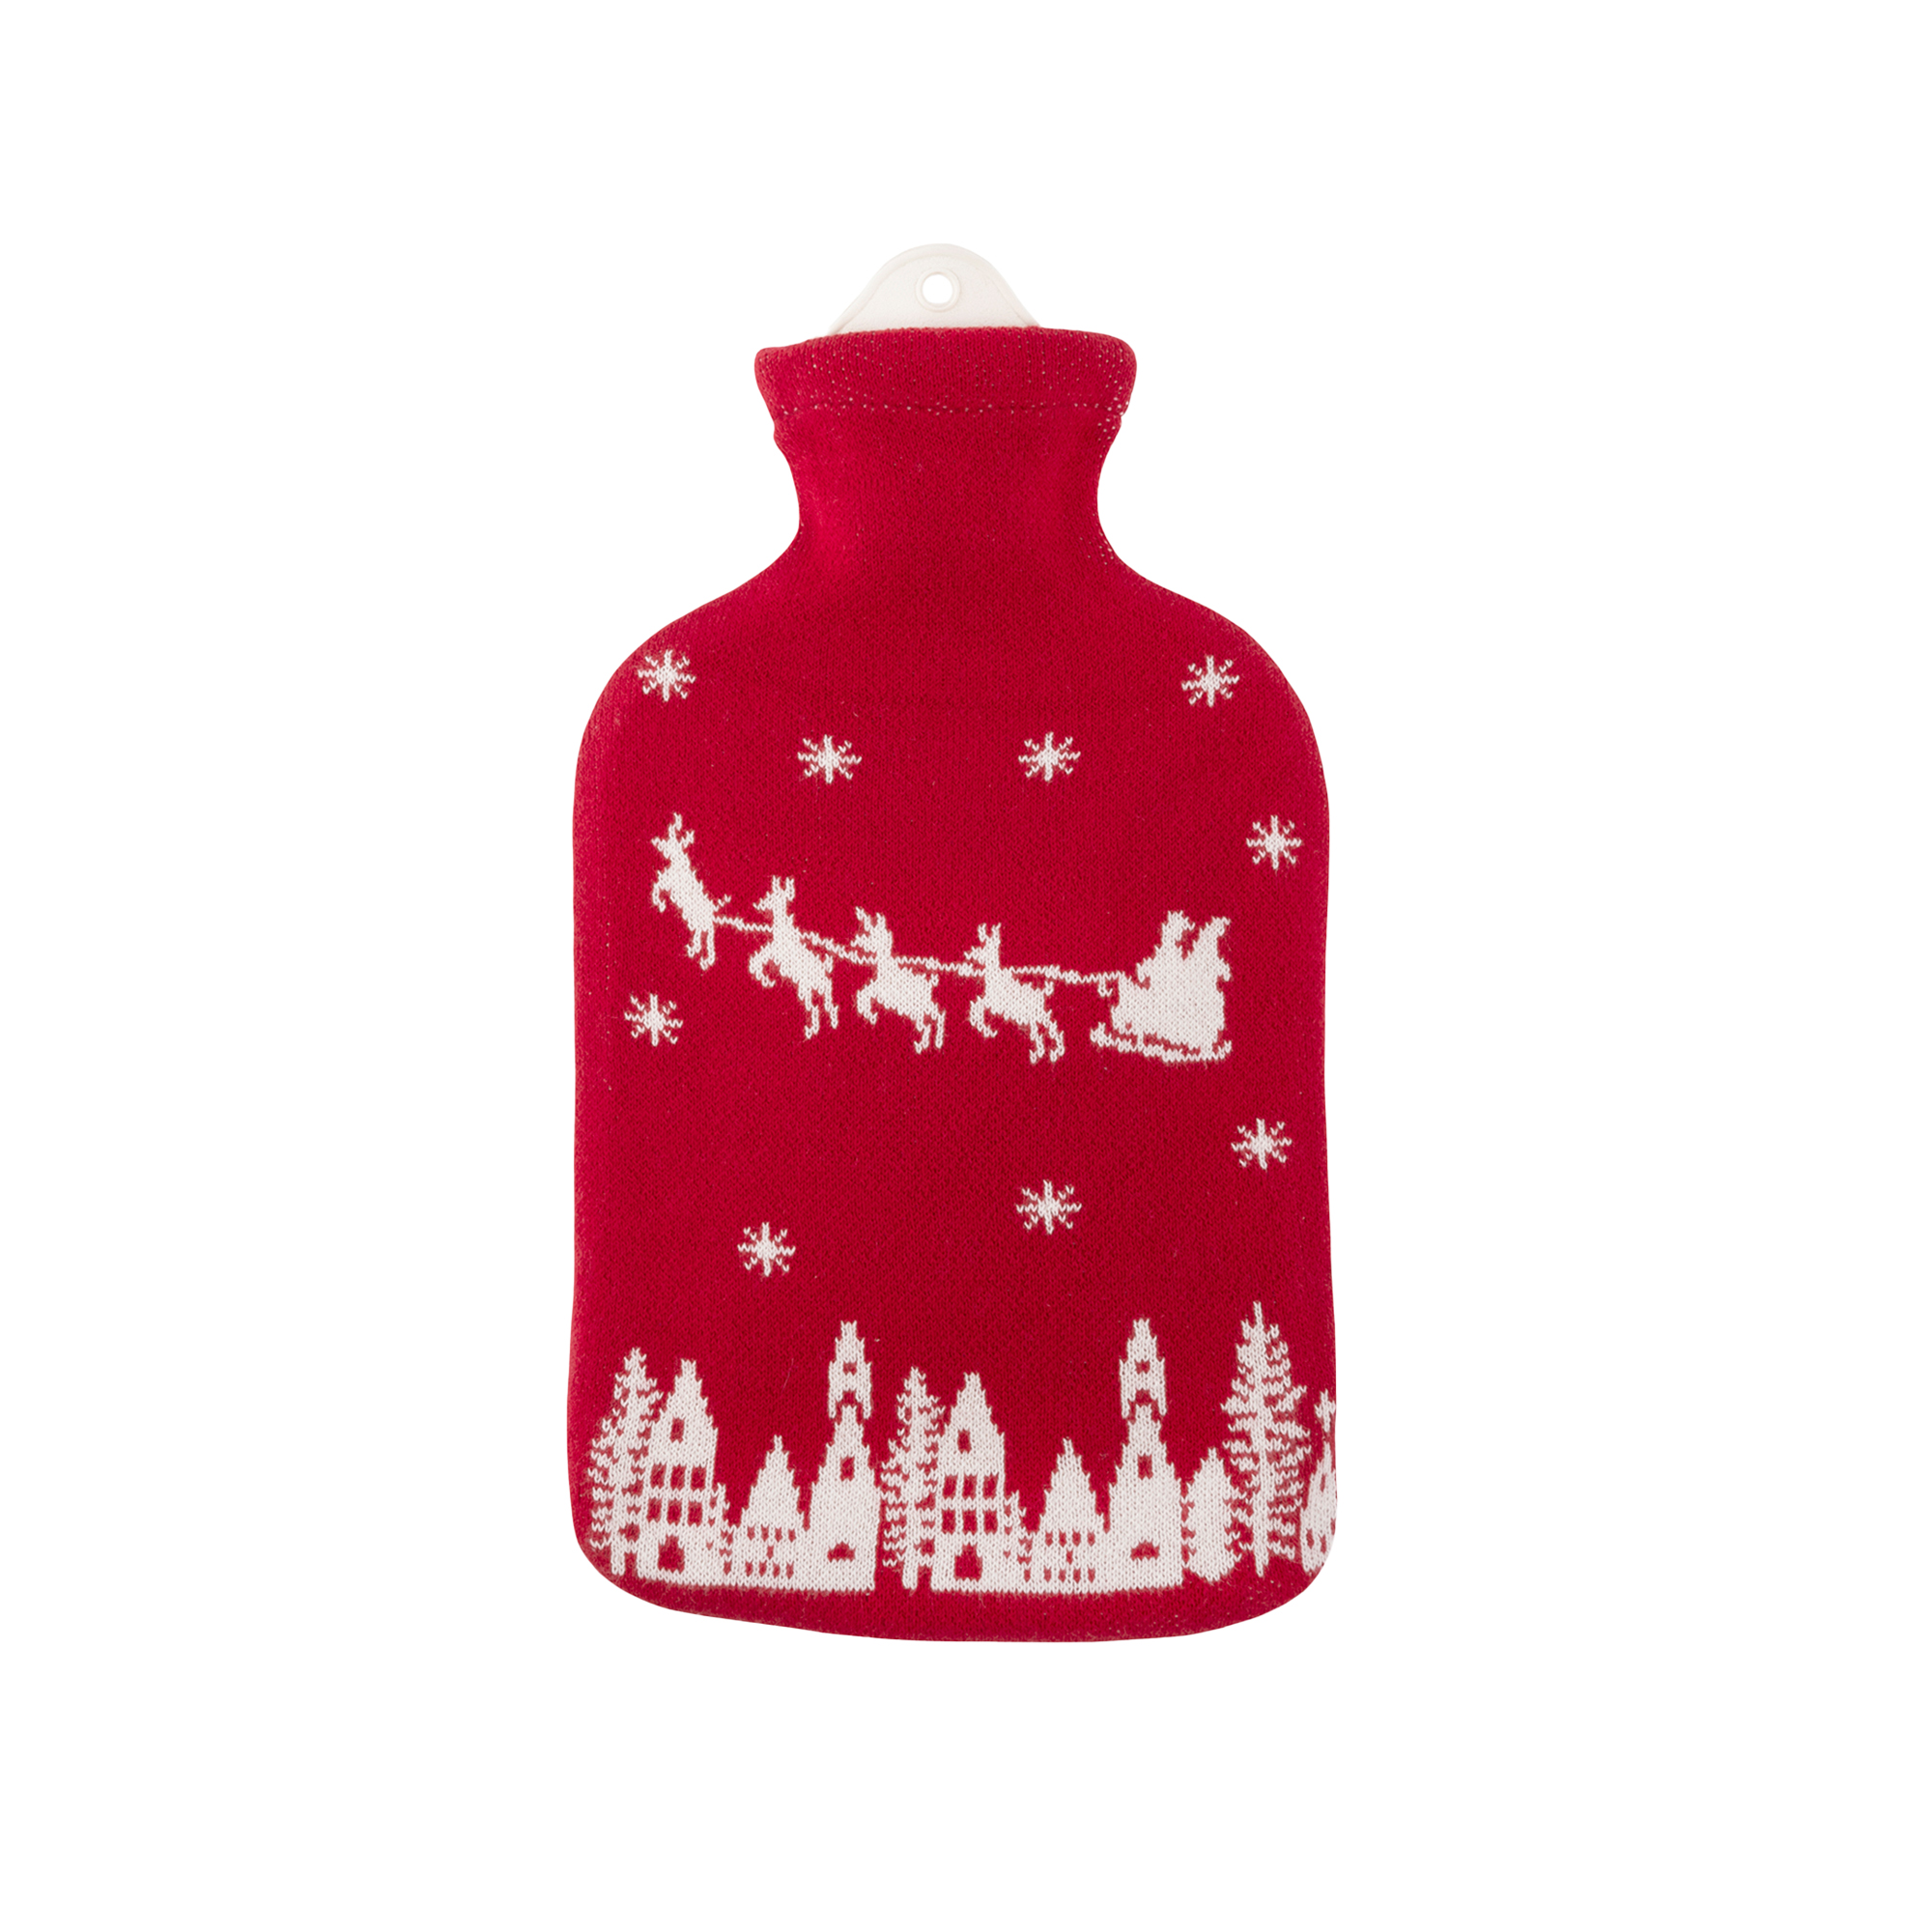 Sänger 2.0 Liter Hot Water Bottle with Cotton Knit Cover "Santa Claus"